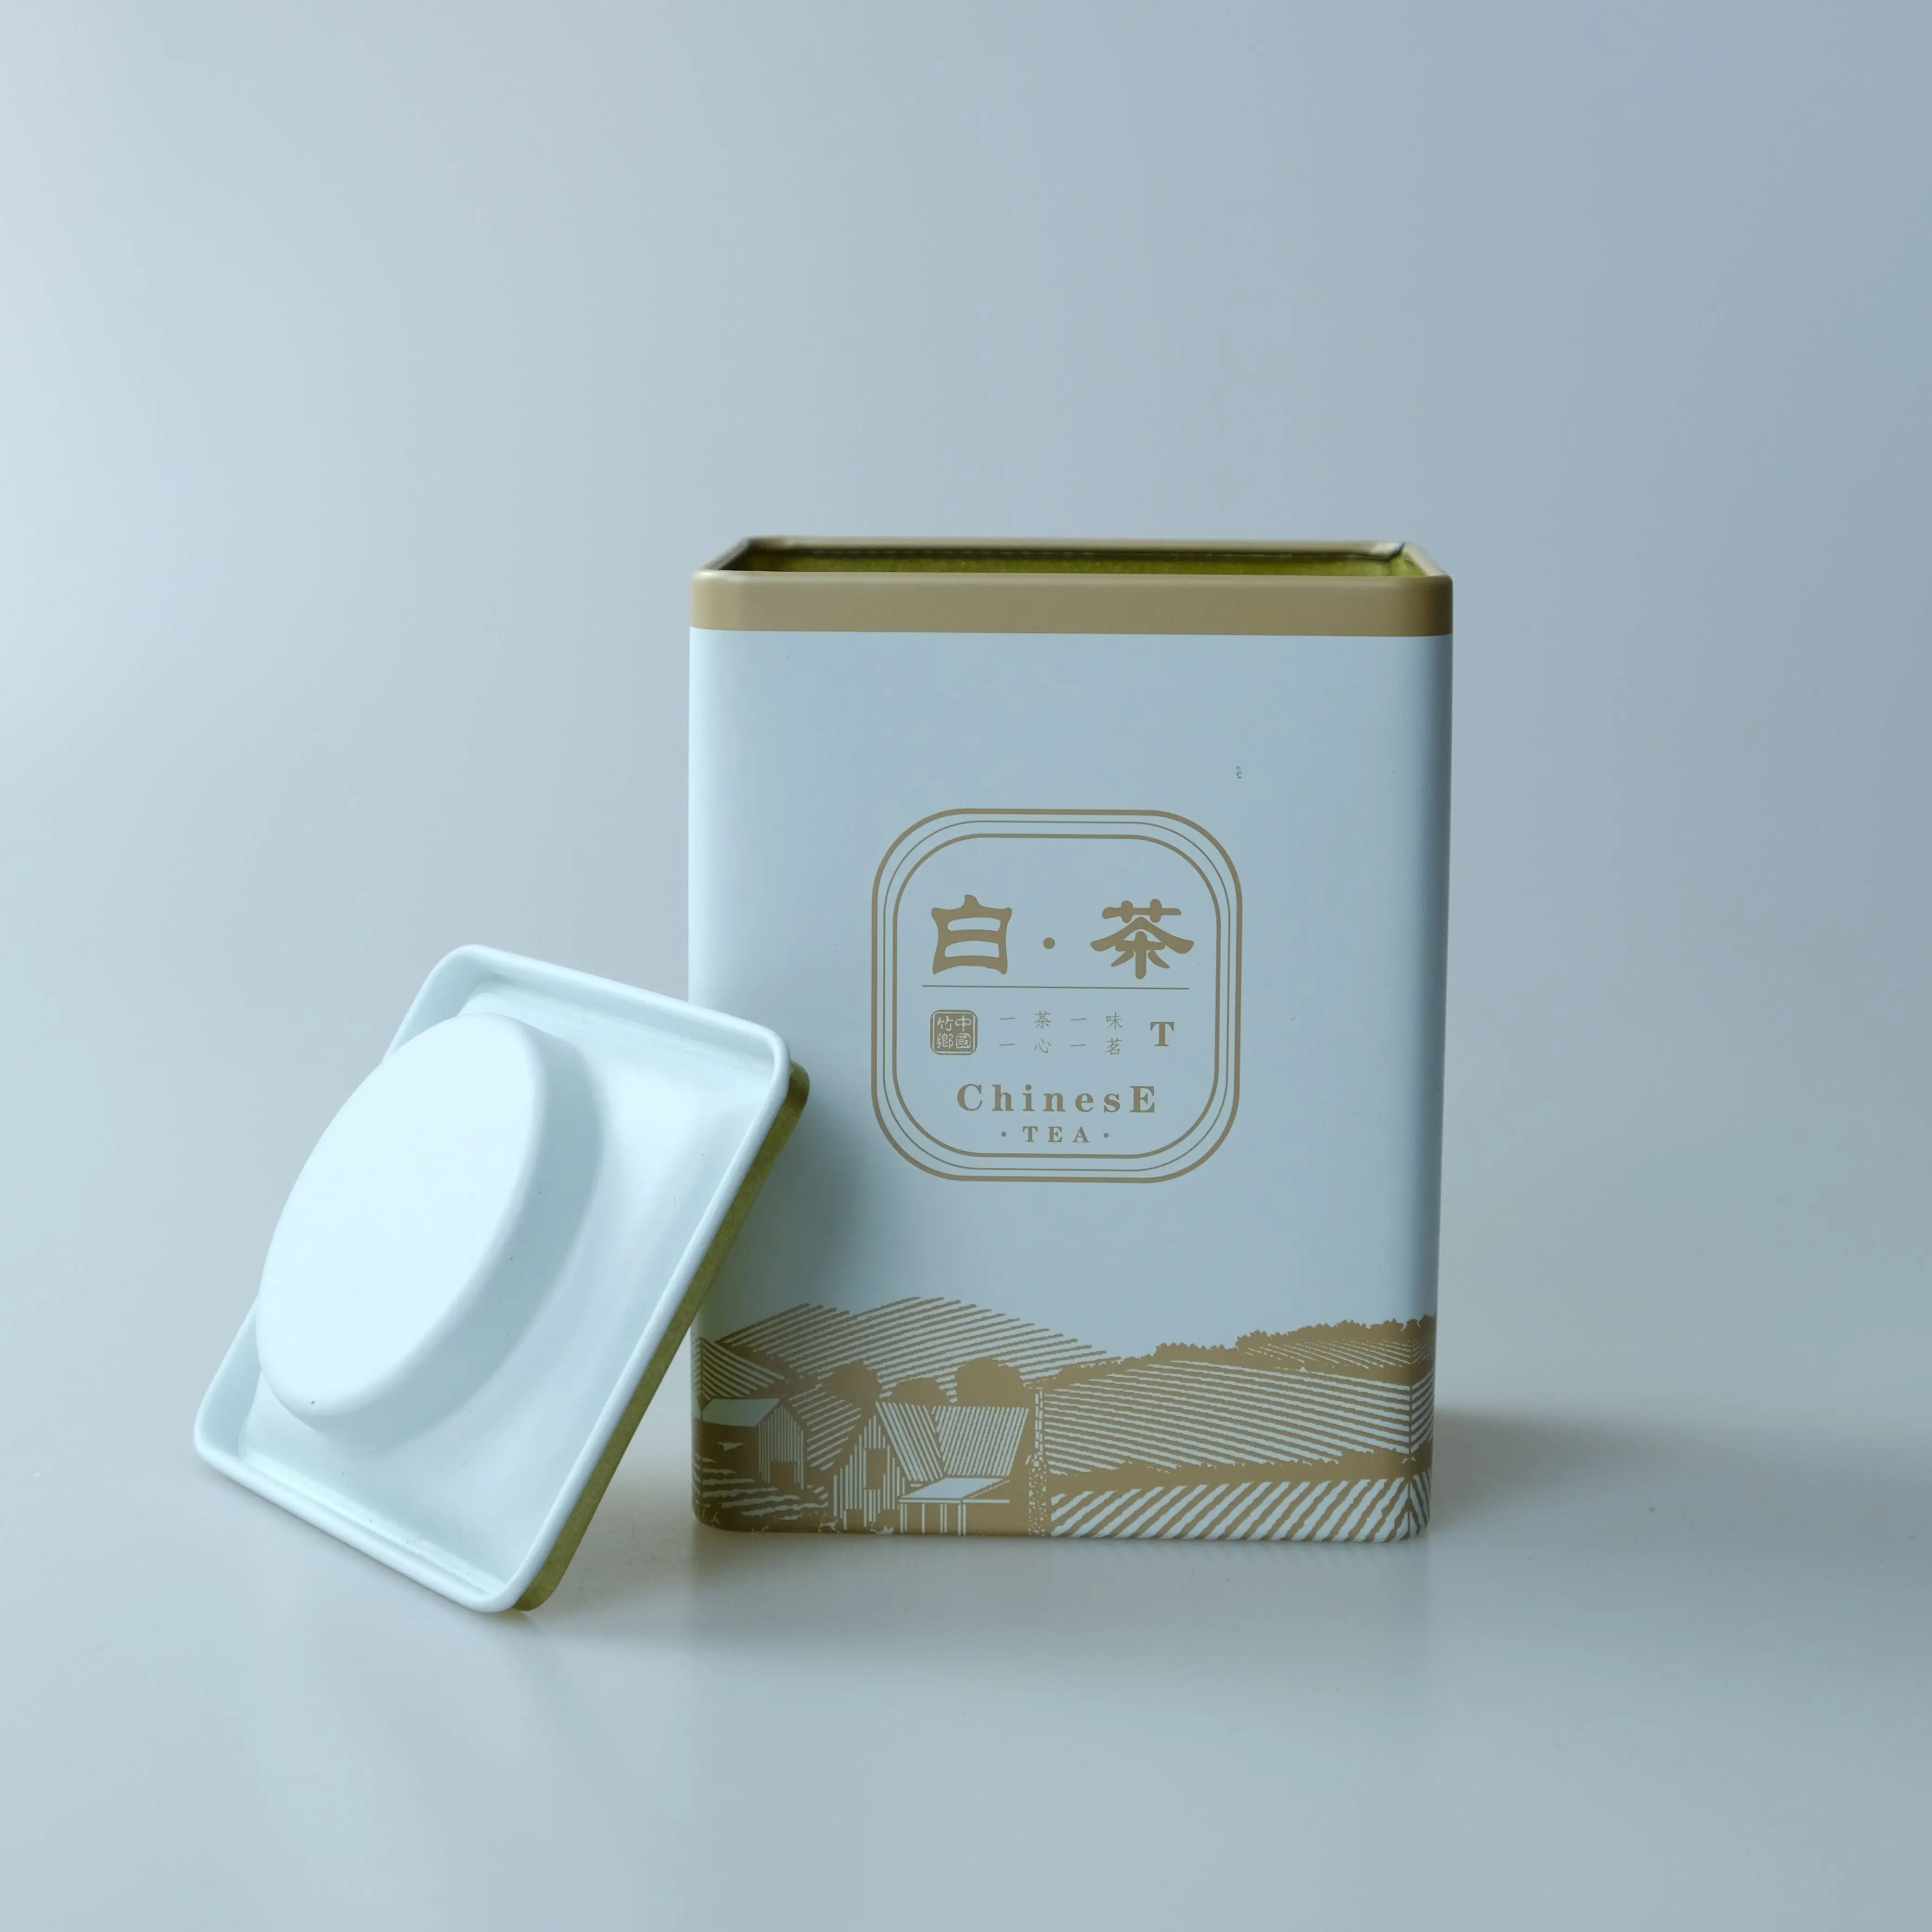 
Customized supply of metal containers, various types of beautifully designed tea boxes 